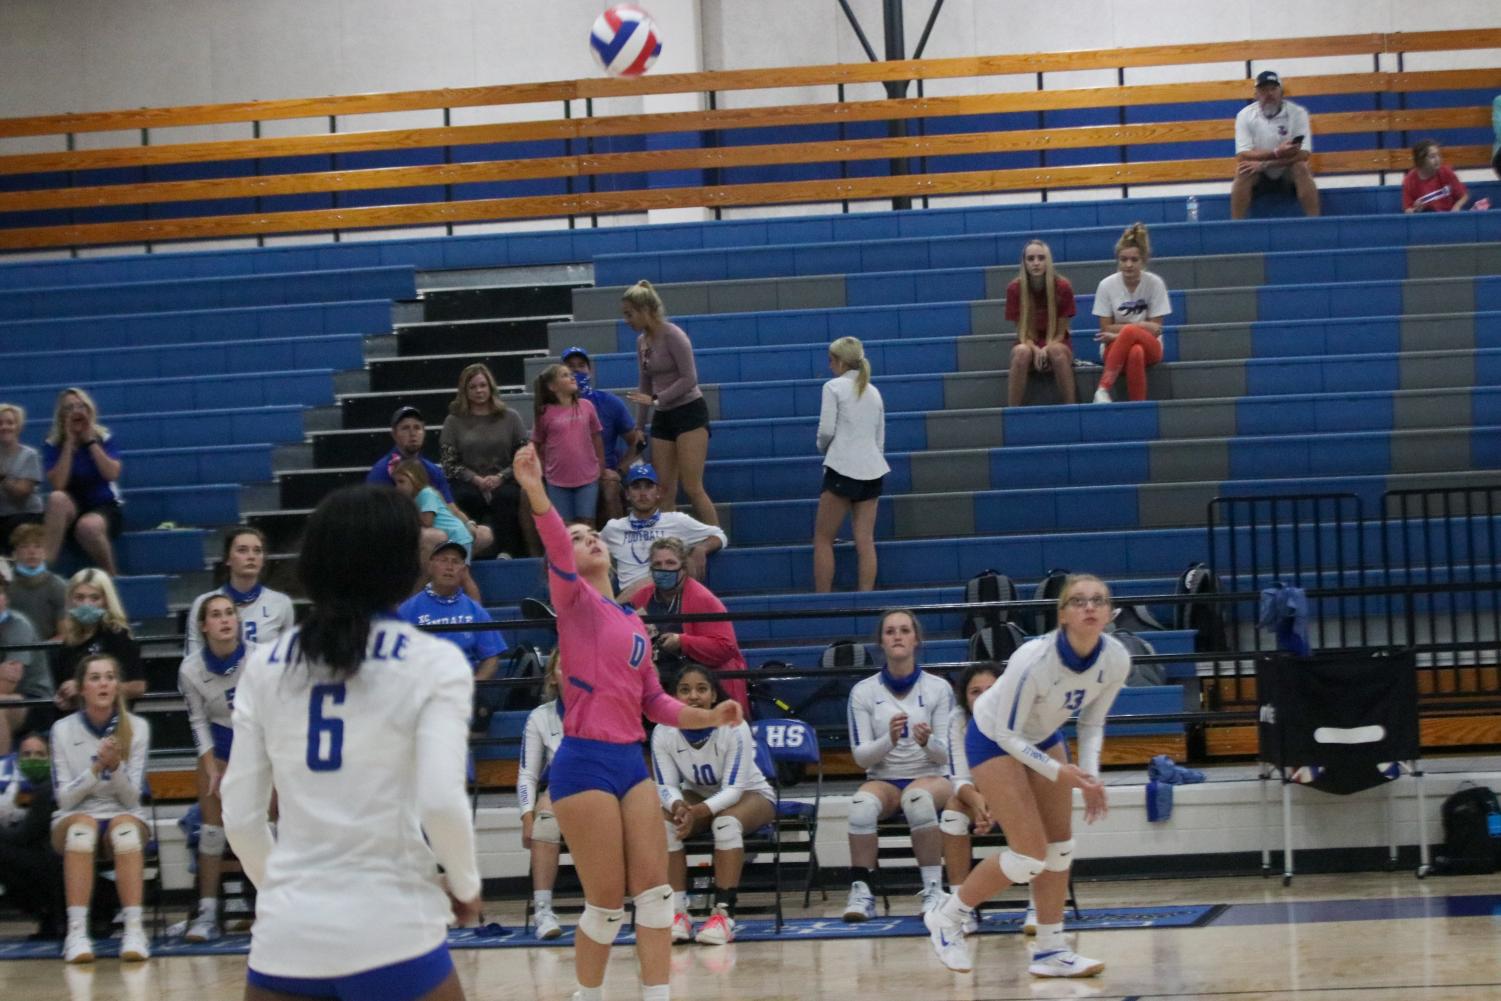 Senior Marleigh Thurman hits the volleyball over the net. The Lady Eagles 6-0 undefeated in district.